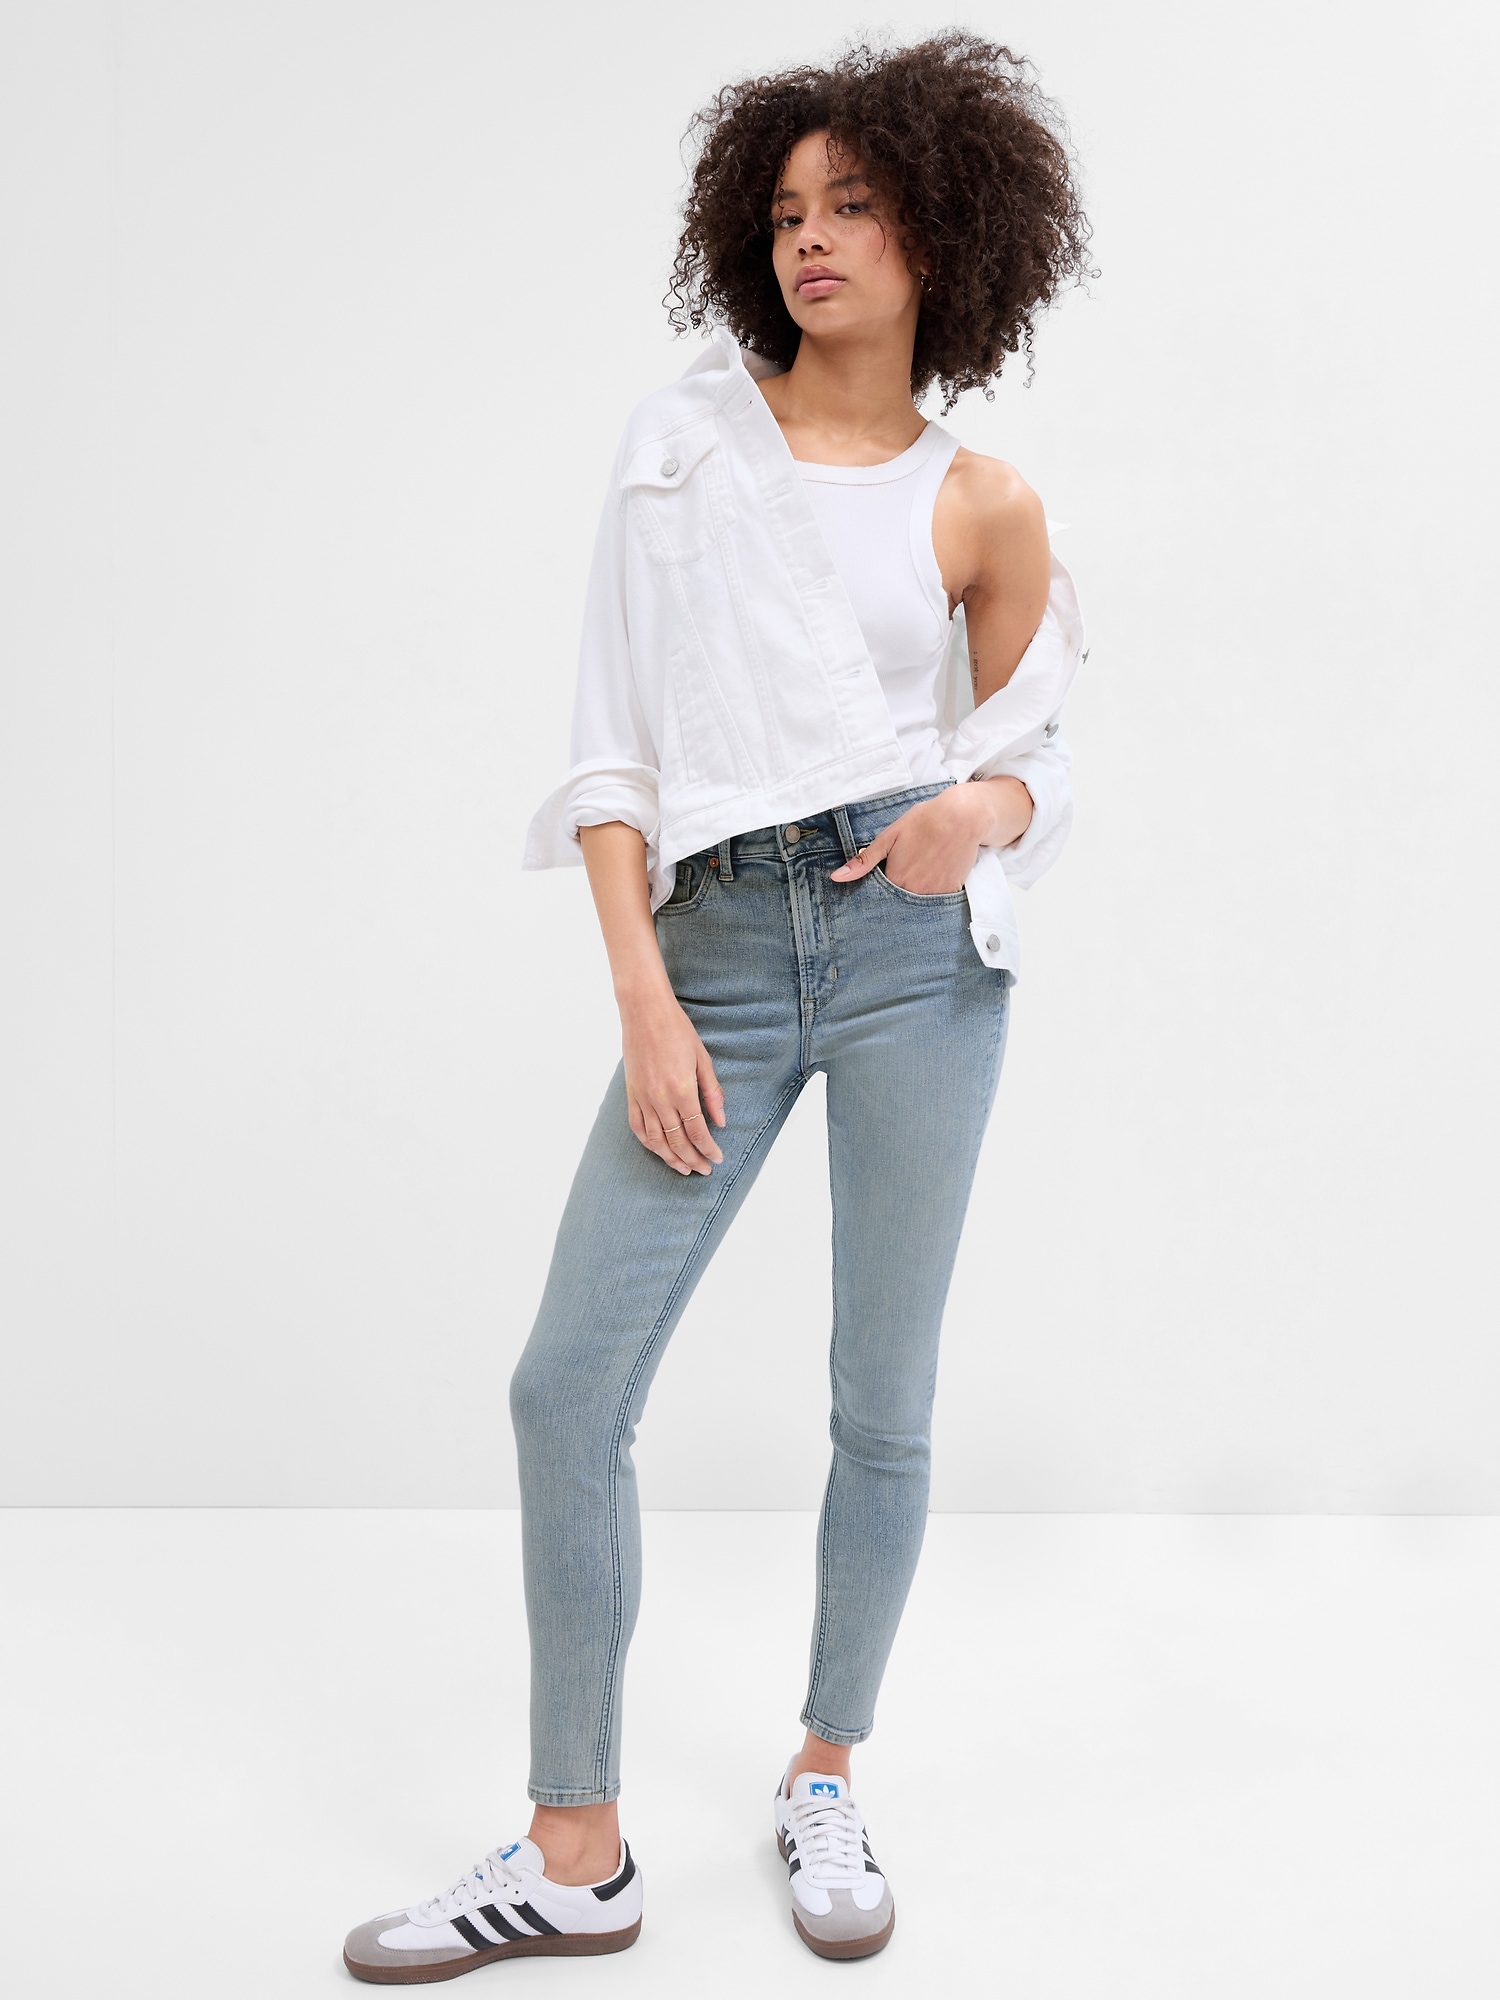 High Rise Universal Legging Jeans with Washwell Gap Factory